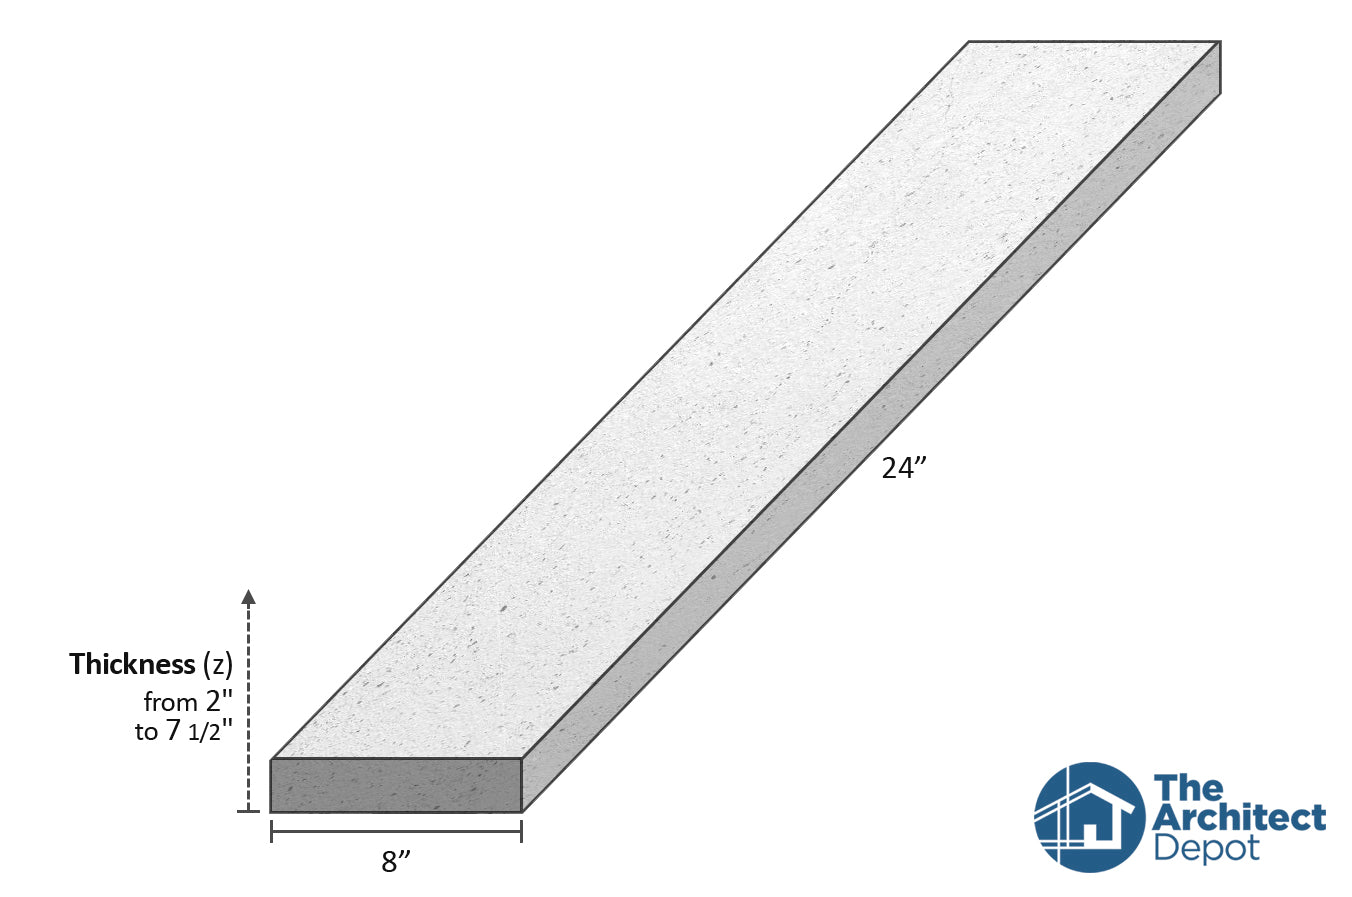 decorative concrete flat band moulding 24 x 8 use the decorative flat band moulding as an exterior moulding and give volume to the architecture of your building concrete flat bands can be use as a exterior window sill or exterior window trim as a simple crown molding decoration 